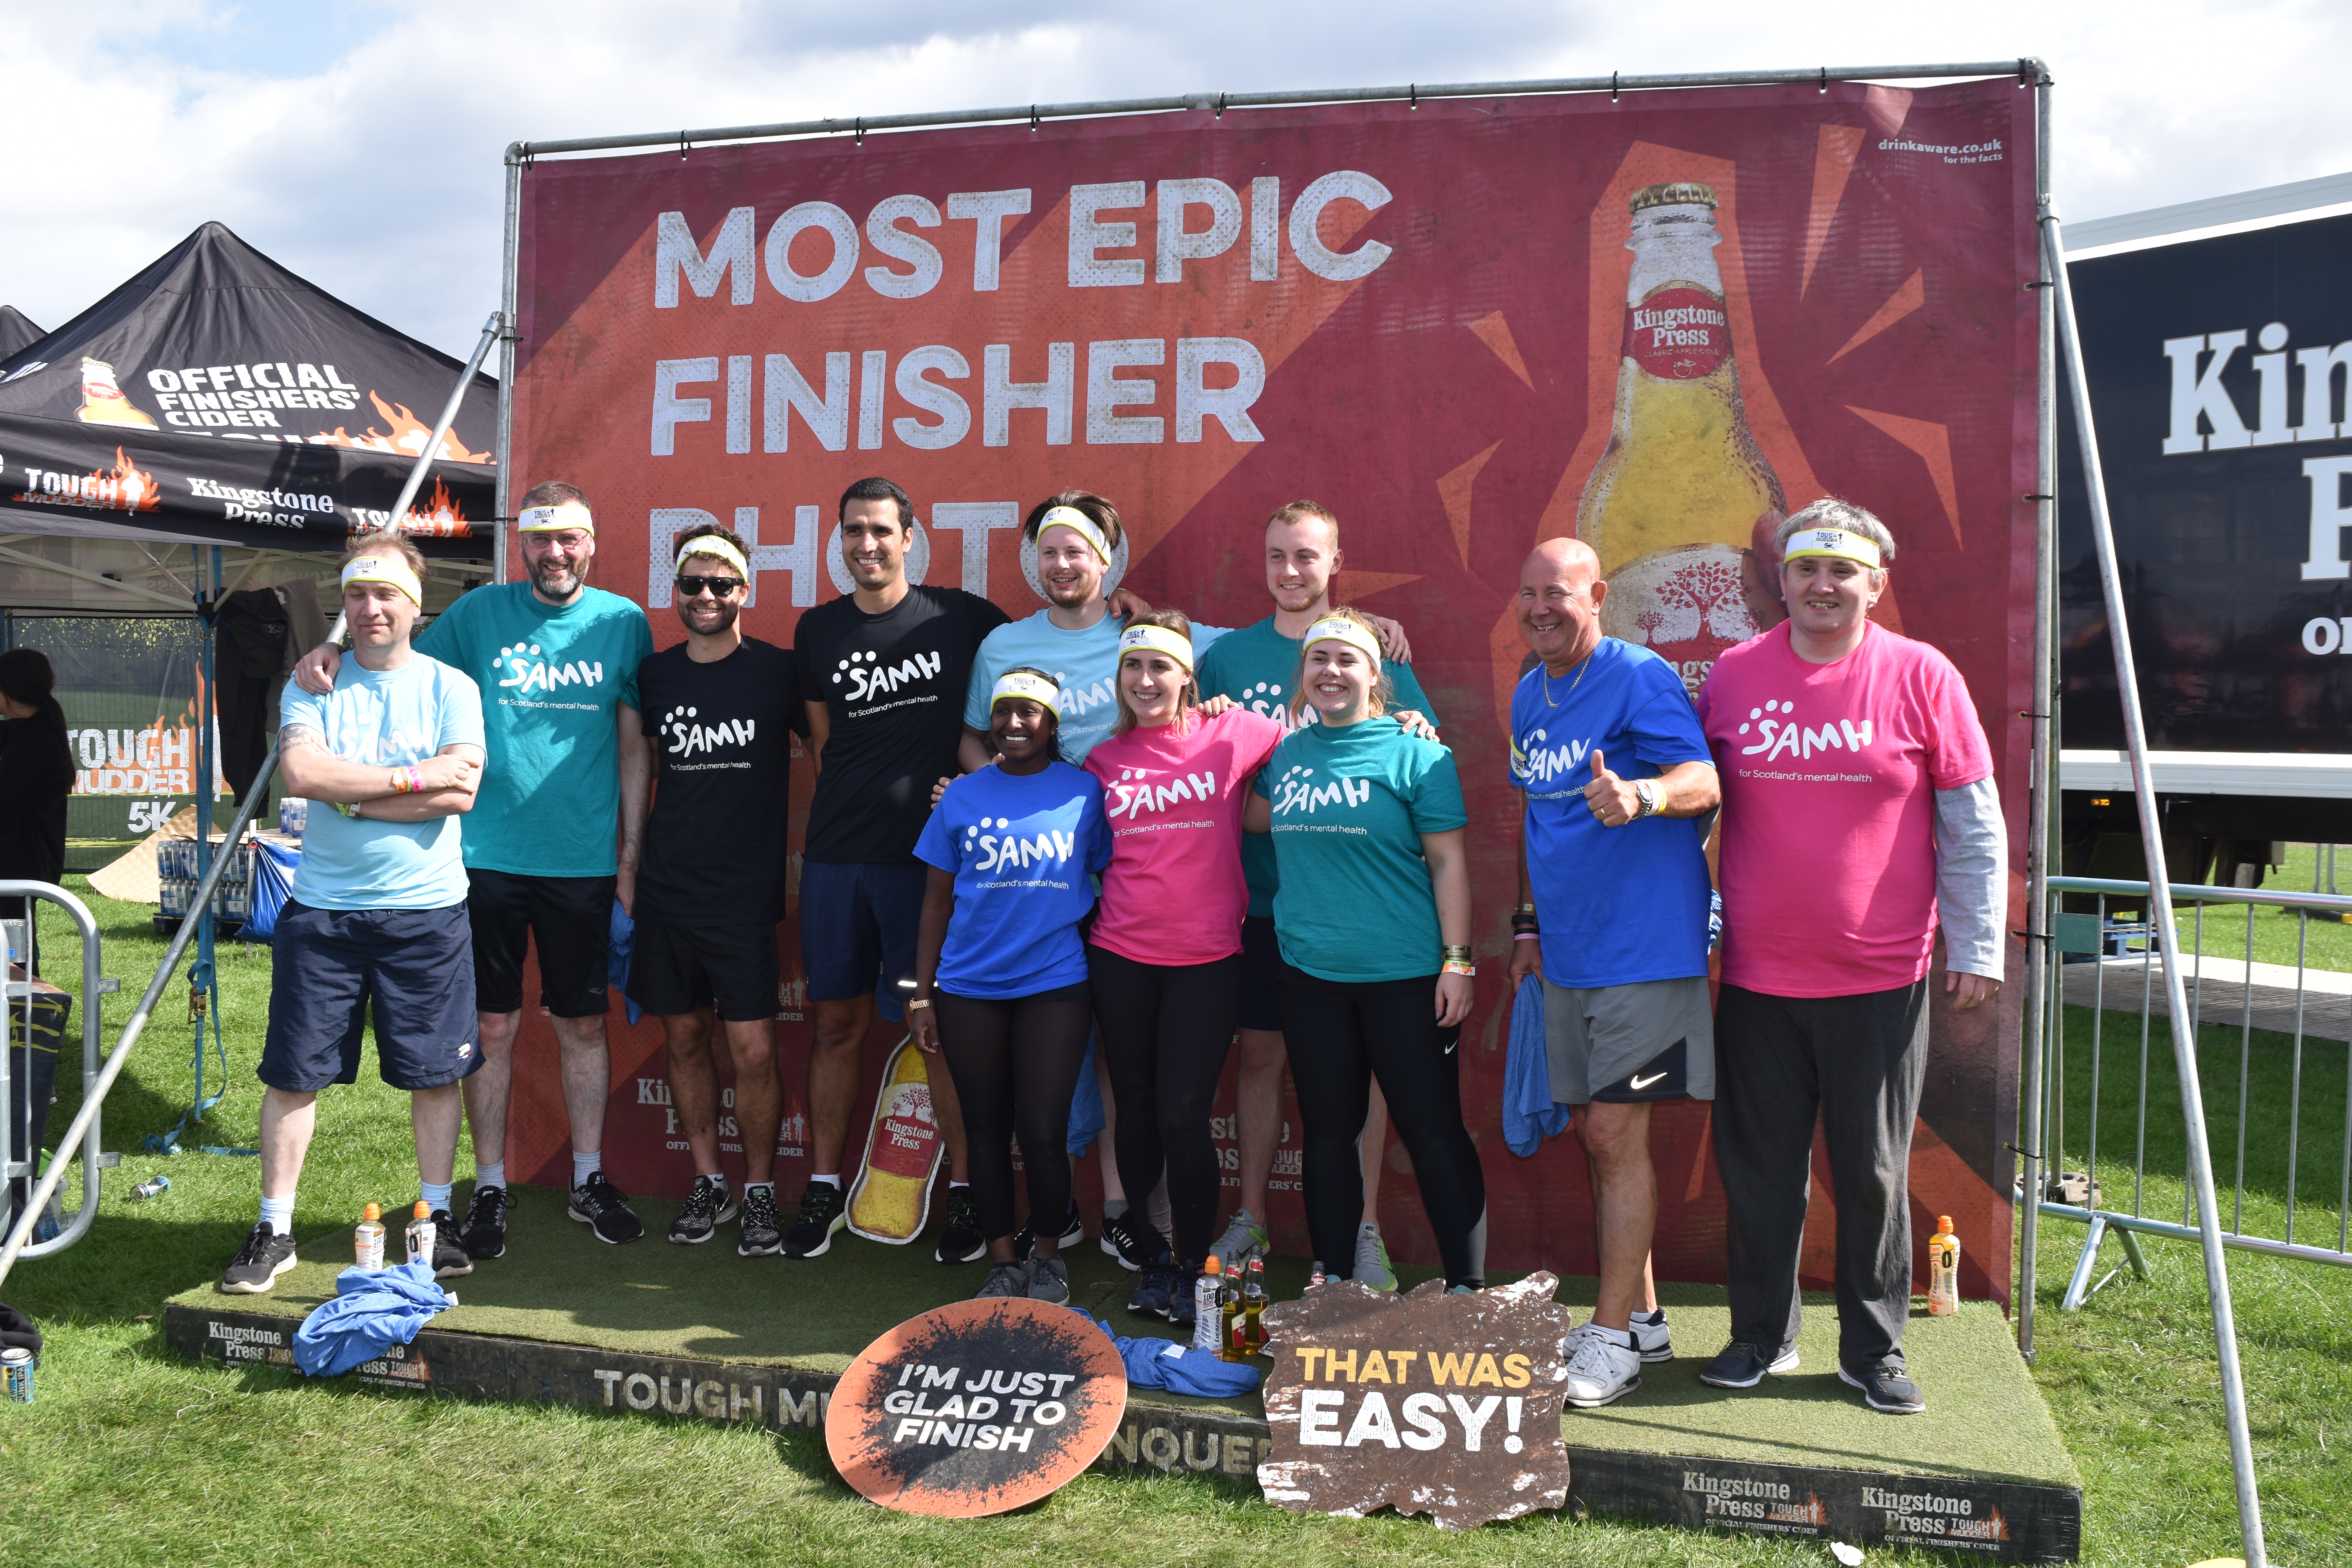 A team from Elite Control Systems and Asset Guardian Solutions take part in the Edinburgh Tough Mudder to raise funds for SAMH (Scottish Association for Mental Health)